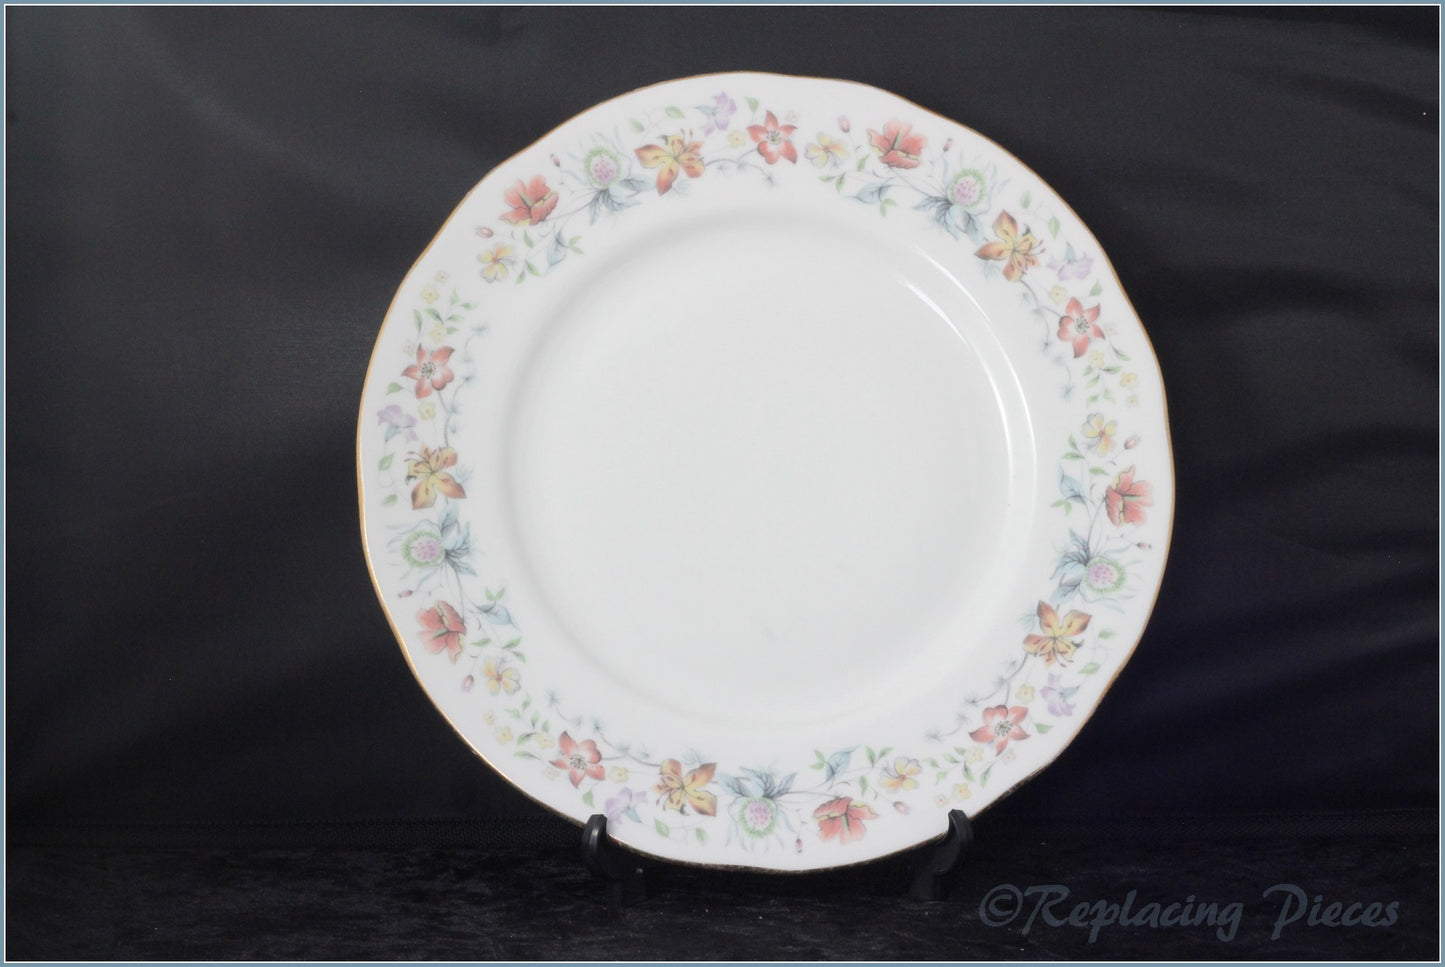 Duchess - Evelyn - 6 5/8" Side Plate